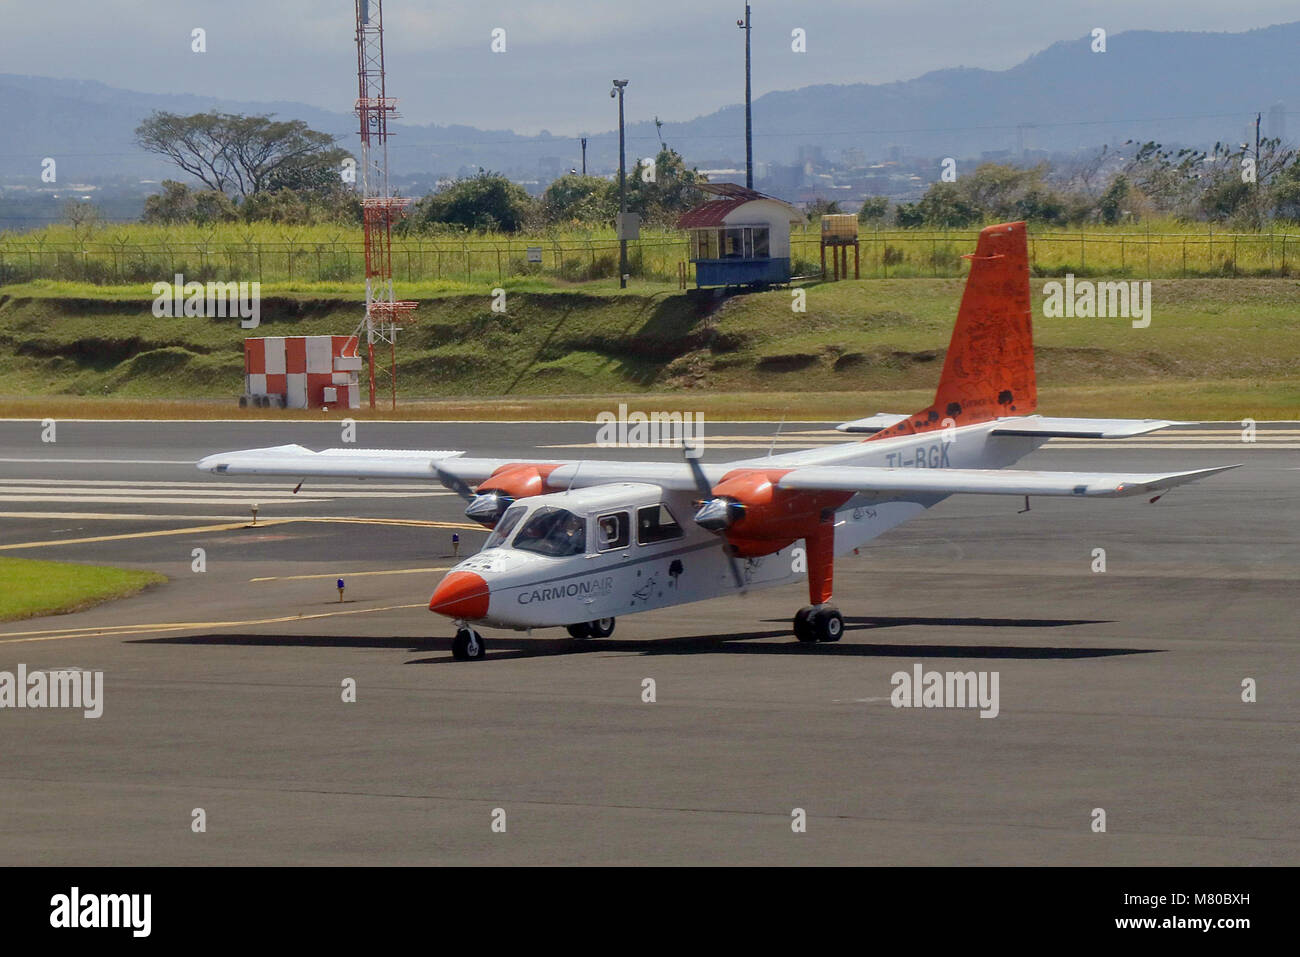 Carmonair light aircraft gets a flat tire as it is about to take off at San Jose Juan Santamaria Airport in Costa Rica causing it to abort takeoff. Stock Photo